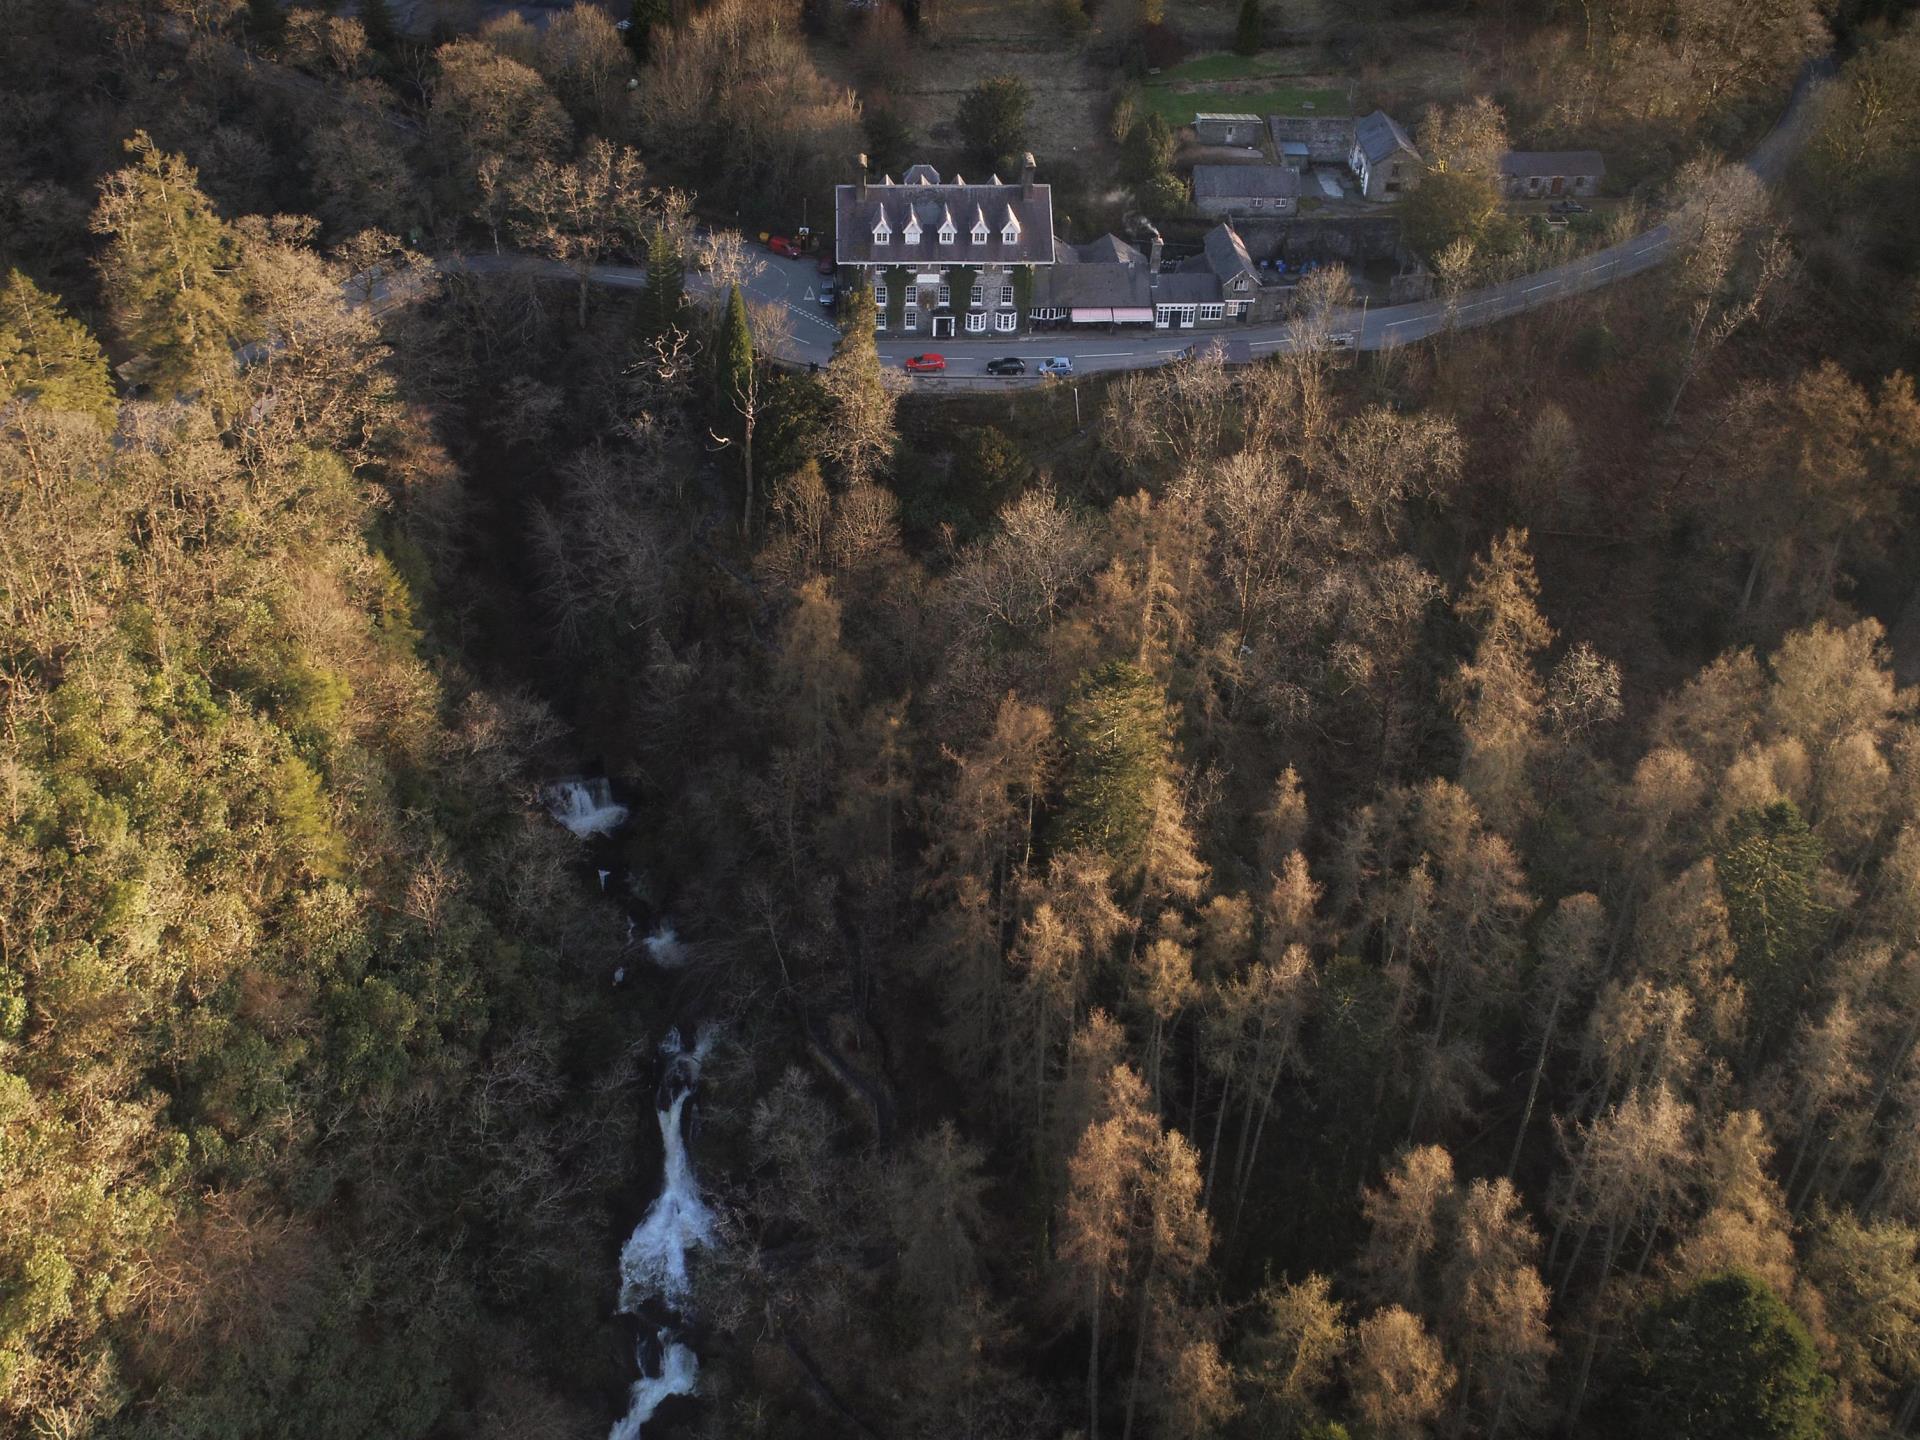 View of the Hafod